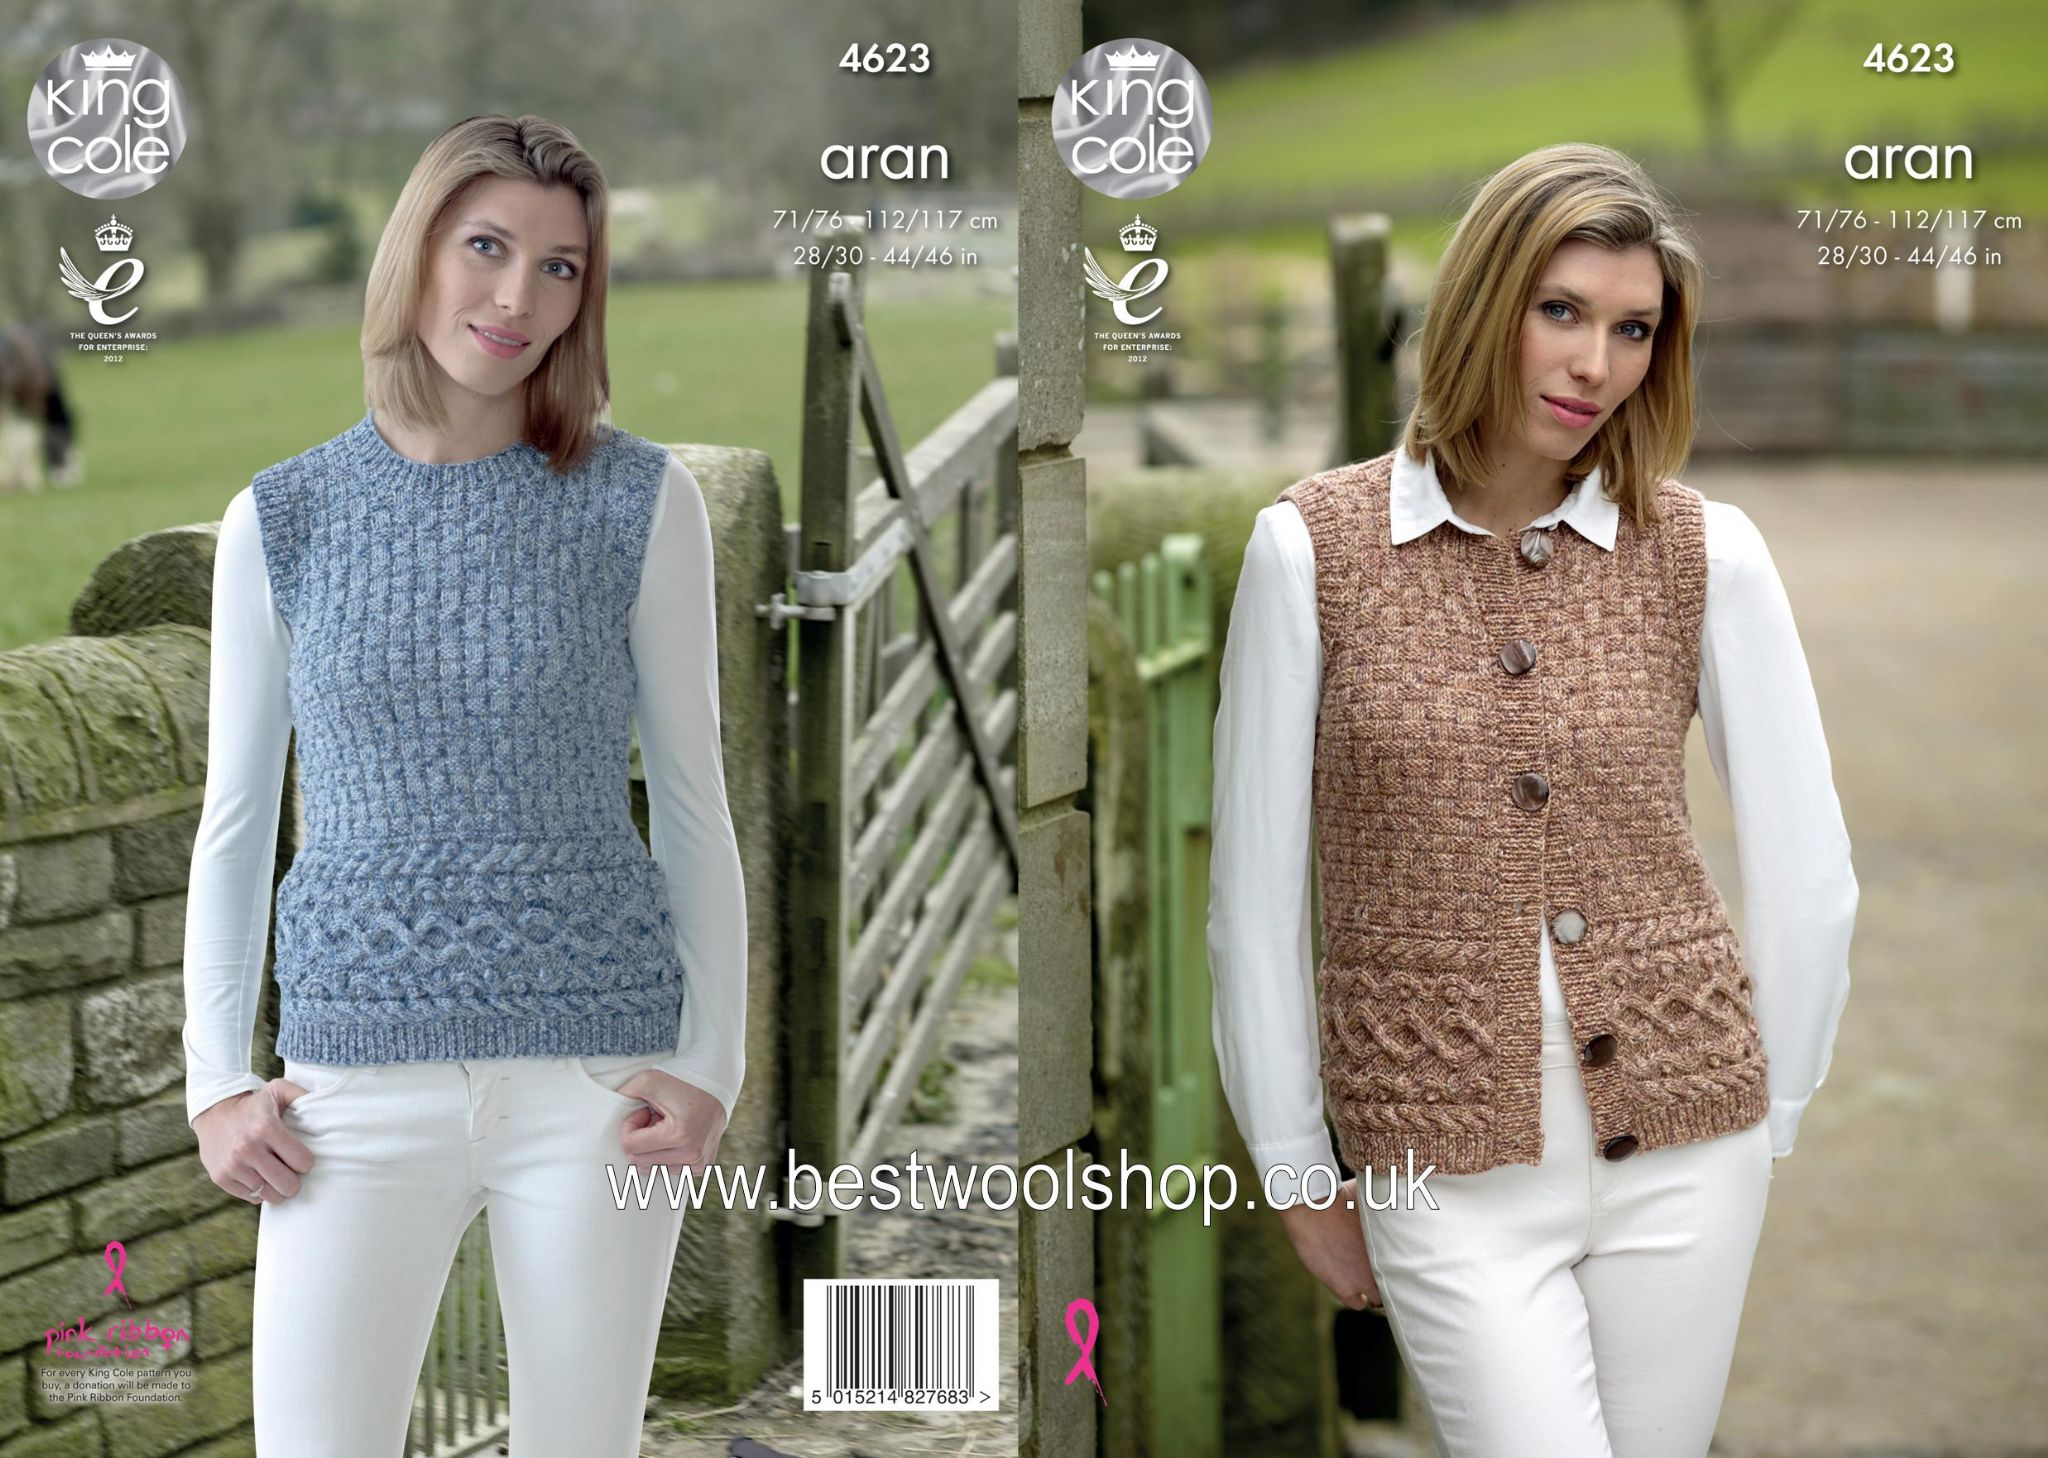 Knitted Tank Top Patterns 4623 King Cole Fashion Aran Combo Waistcoat Tank Top Sleeveless Sweater Knitting Pattern To Fit Chest 28 To 46